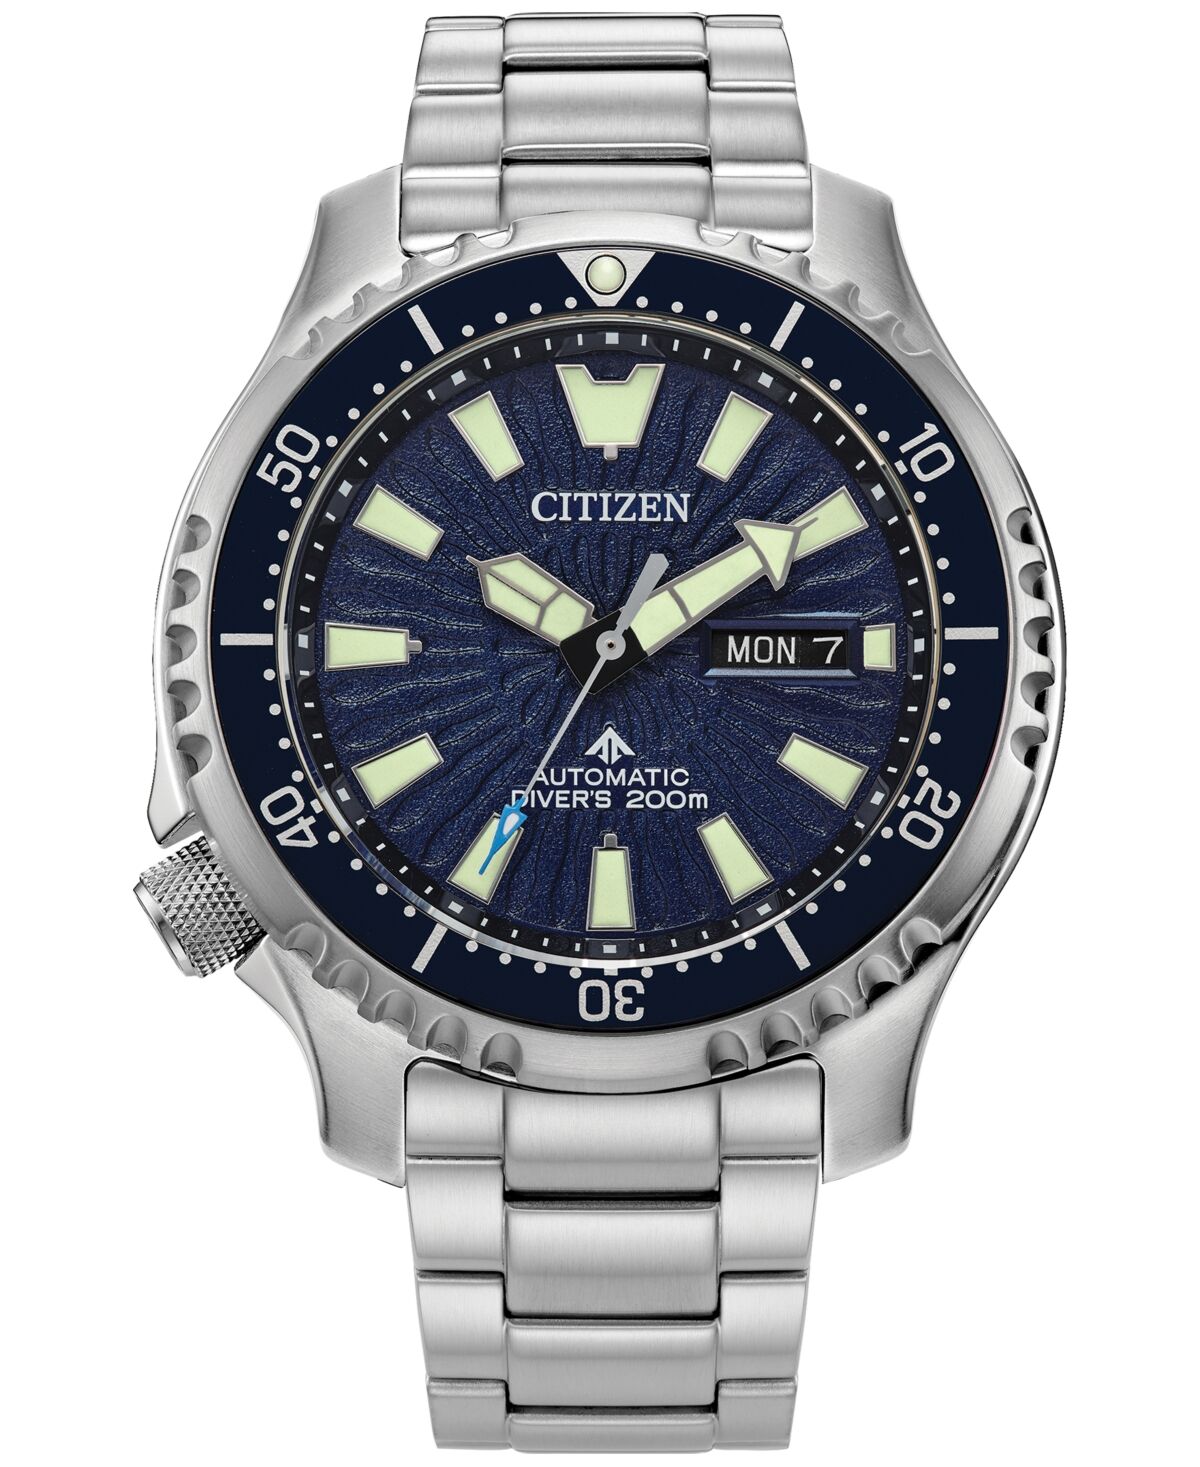 Citizen Men's Automatic Promaster Stainless Steel Bracelet Watch 44mm - Silver-tone